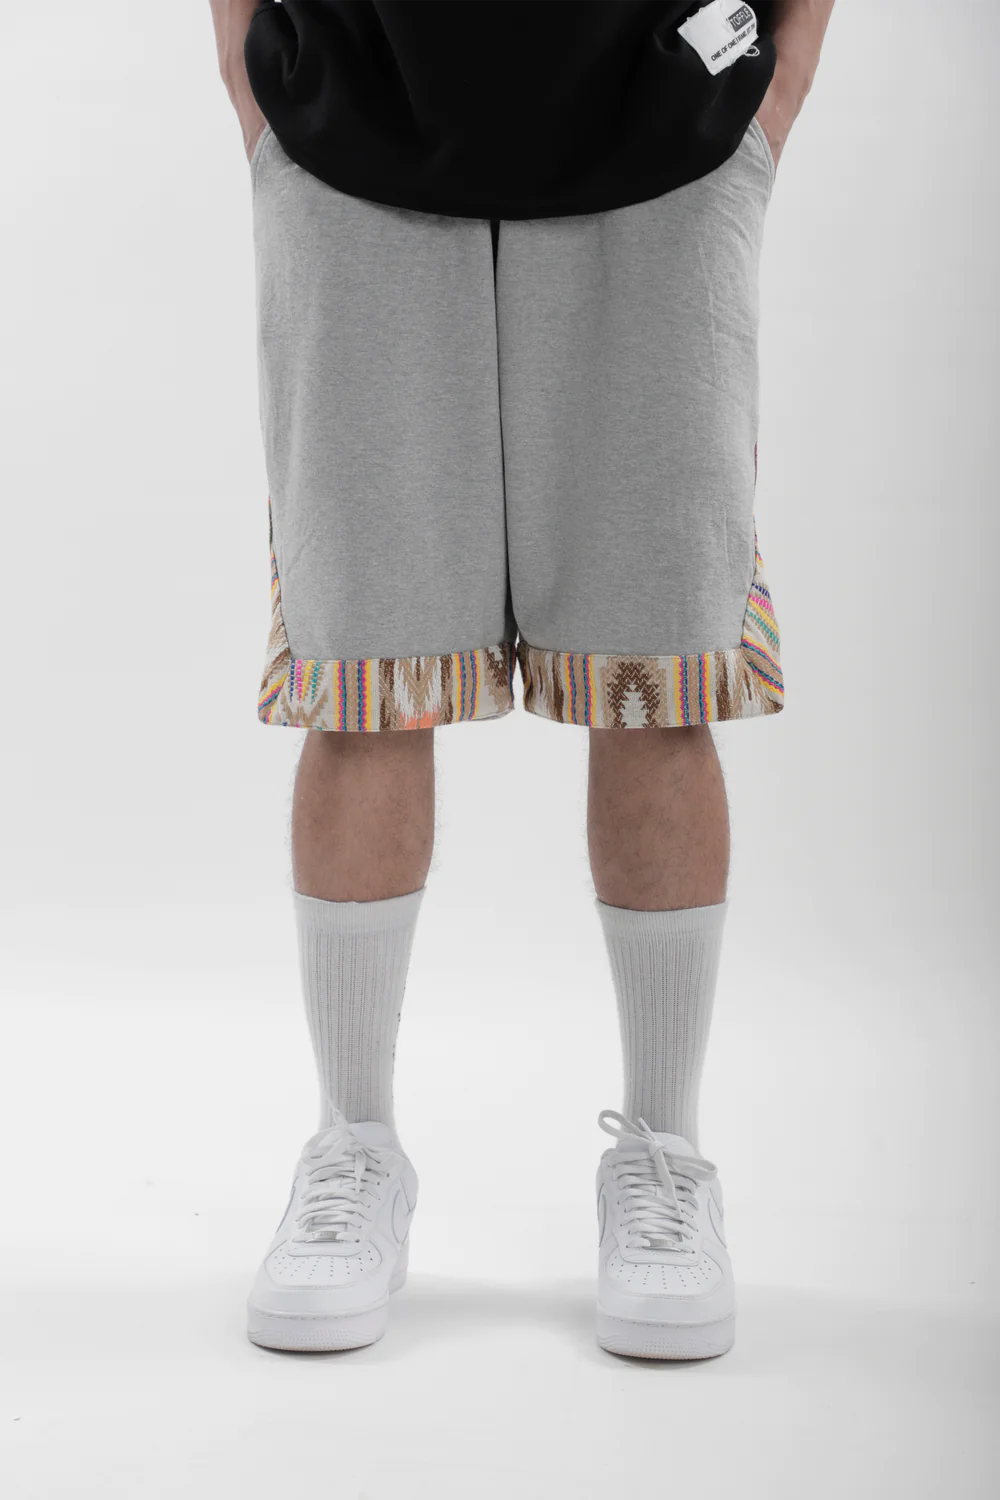 Grey Baller Shorts, a product by TOFFLE